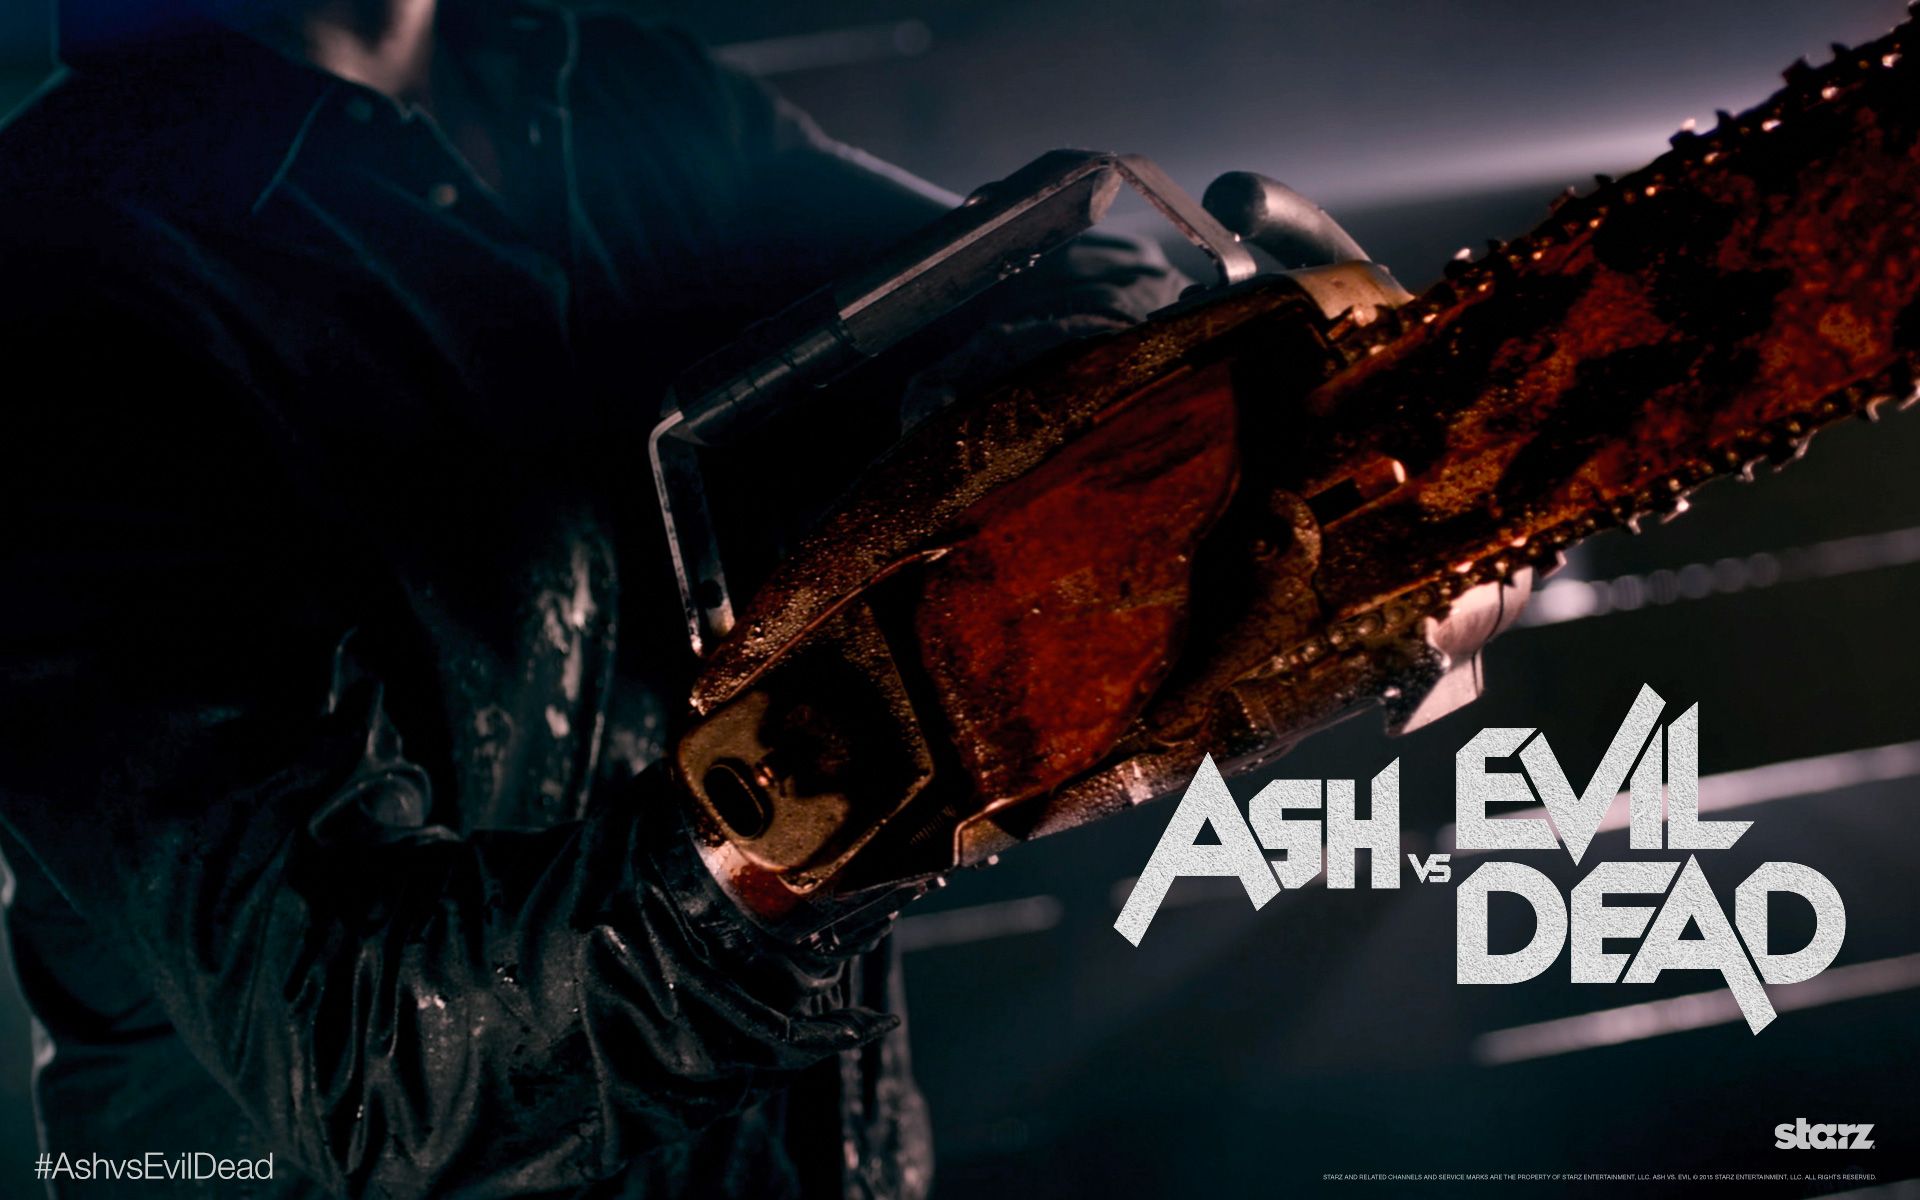 Ash vs Evil Dead on Home Video This Summer